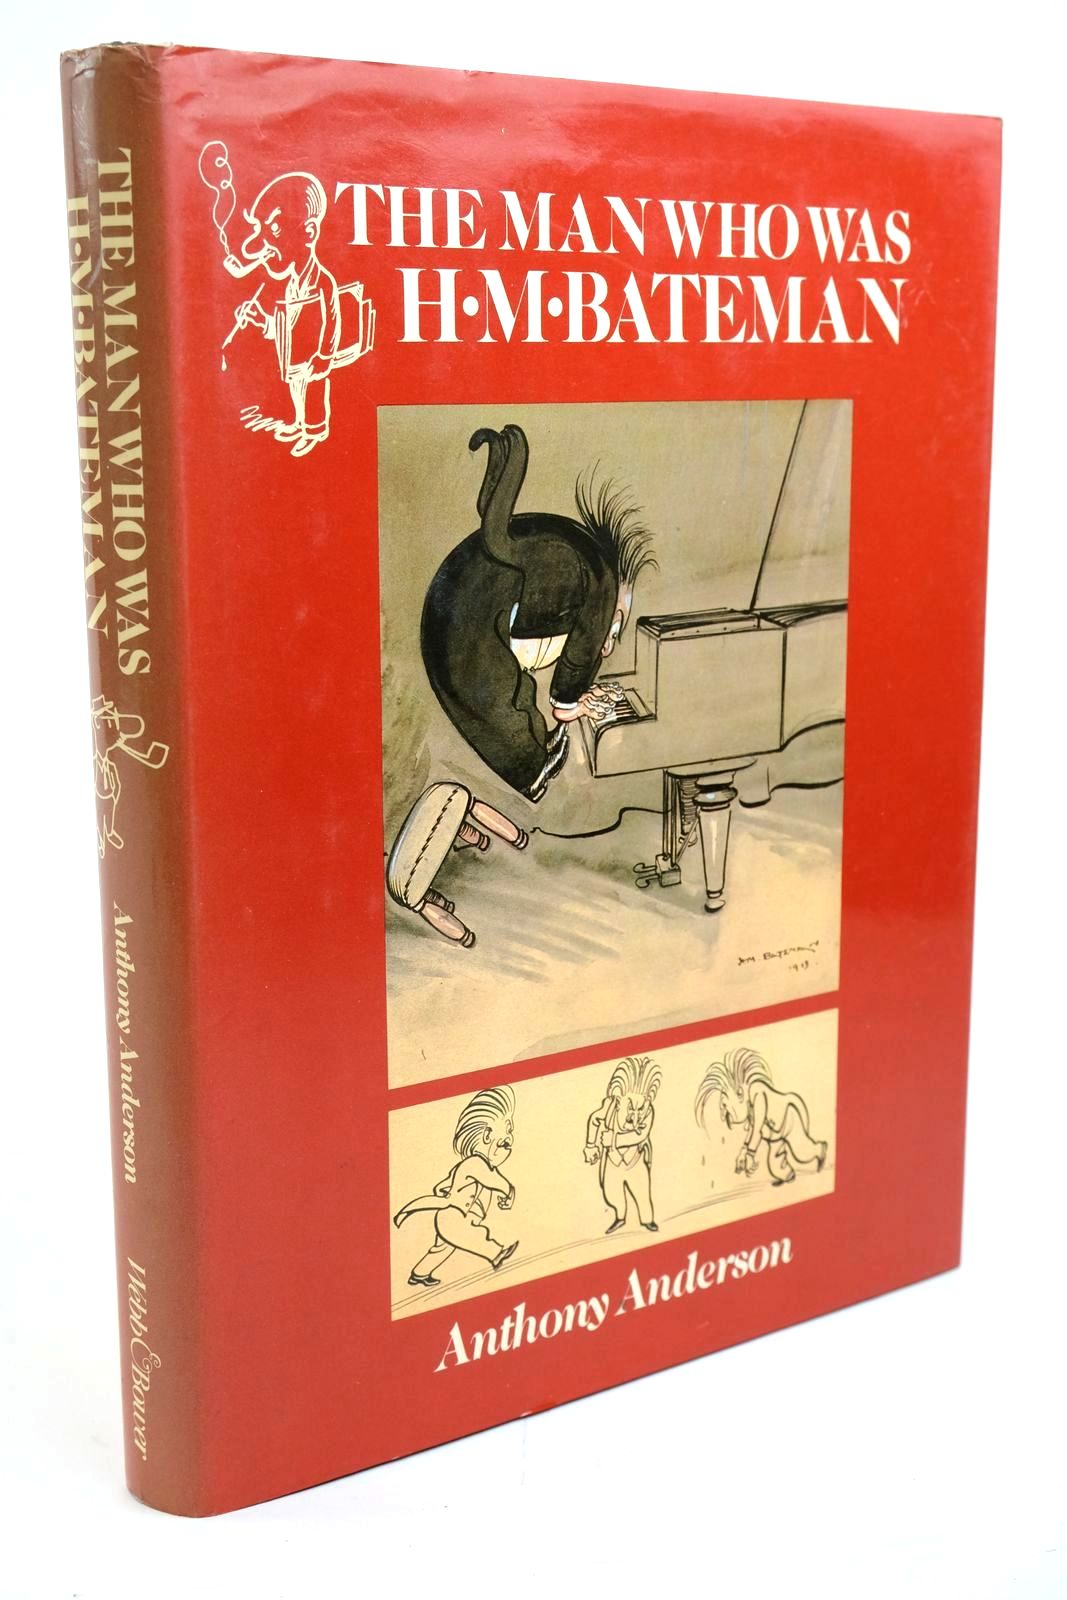 Photo of THE MAN WHO WAS H.M.BATEMAN written by Anderson, Anthony illustrated by Bateman, H.M. published by Webb & Bower (STOCK CODE: 1321411)  for sale by Stella & Rose's Books